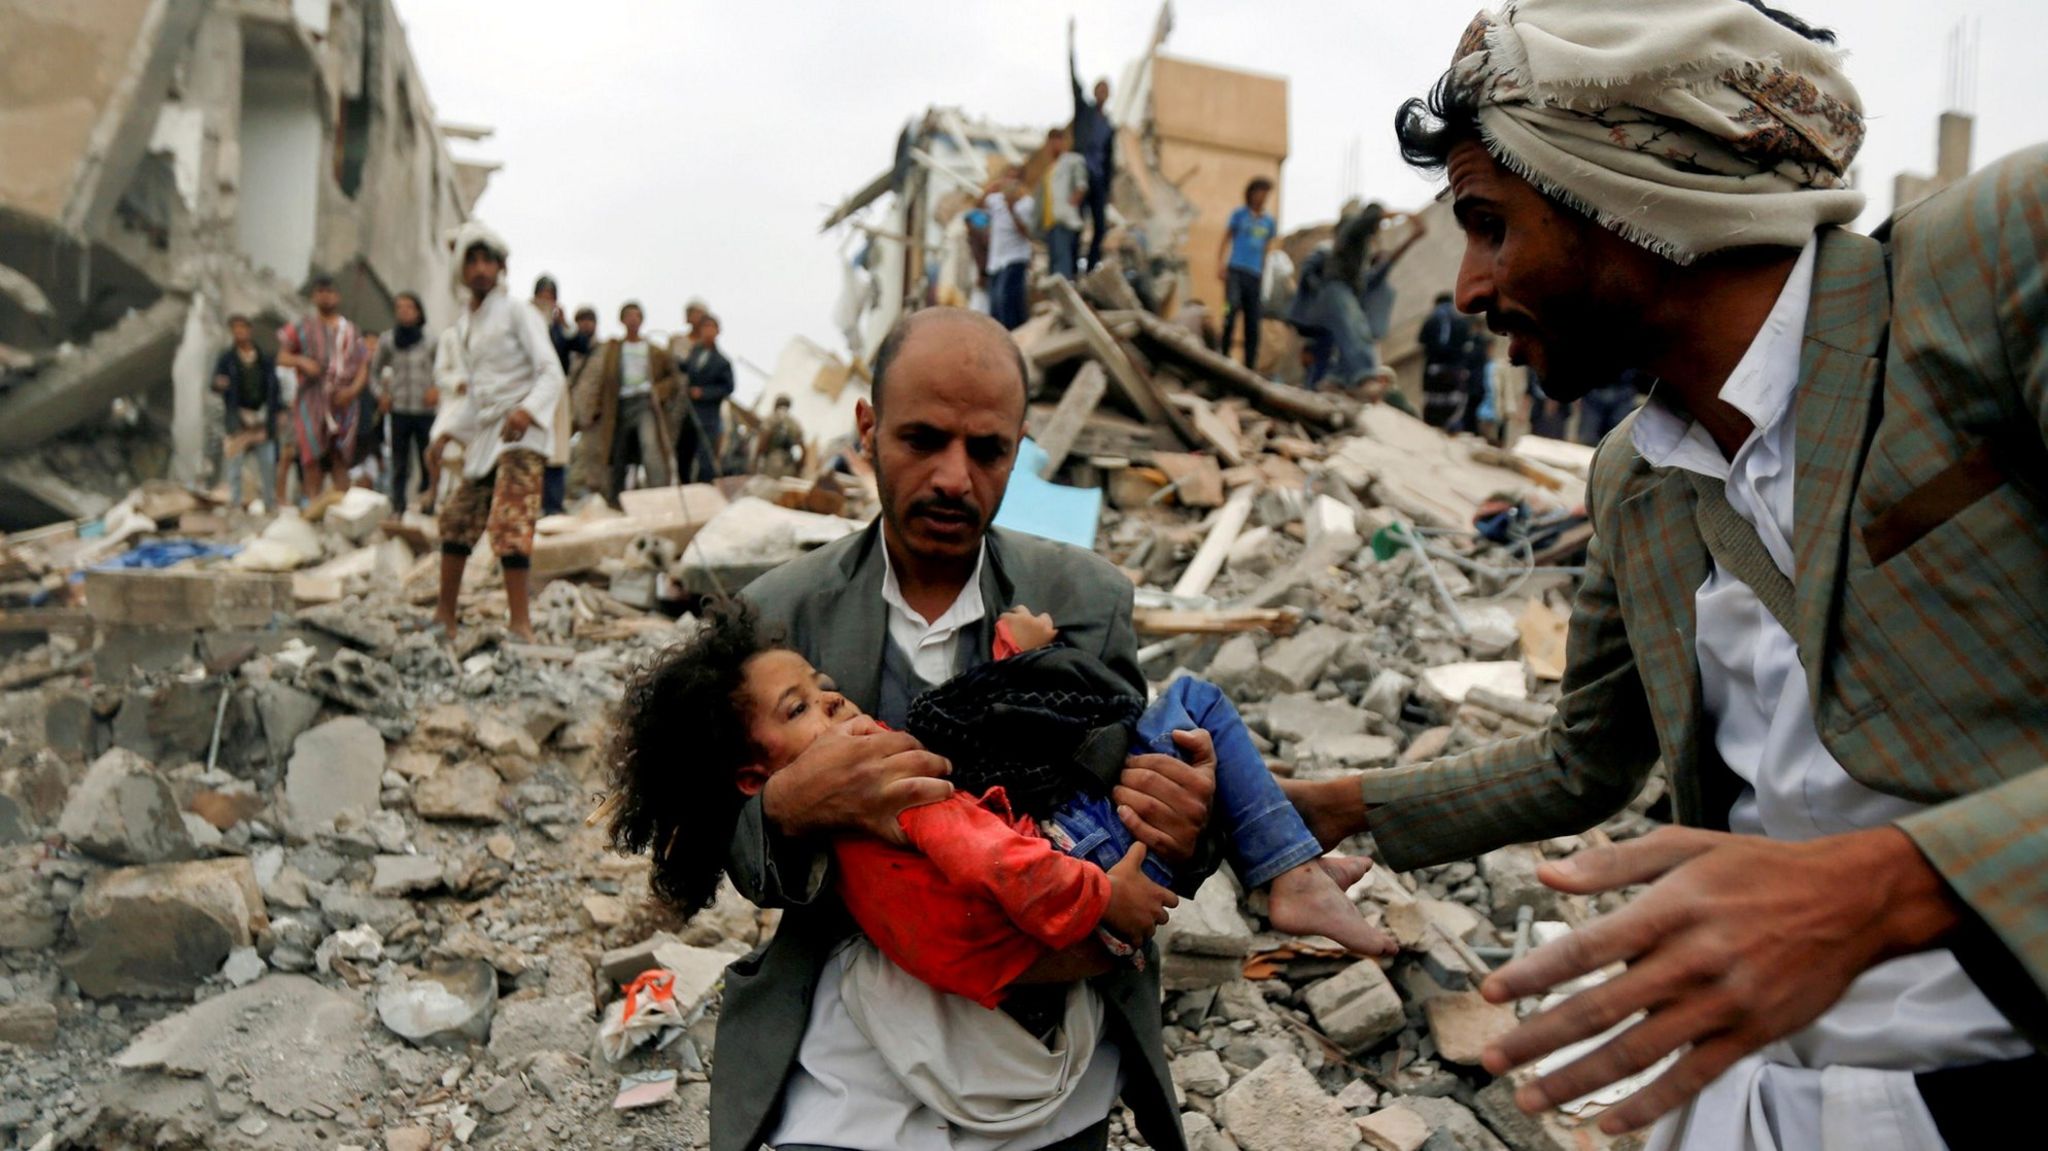 A man carries a girl rescued from the site of a suspected Saudi-led air strike that killed eight members of her family in Sanaa, Yemen (25 August 2017)